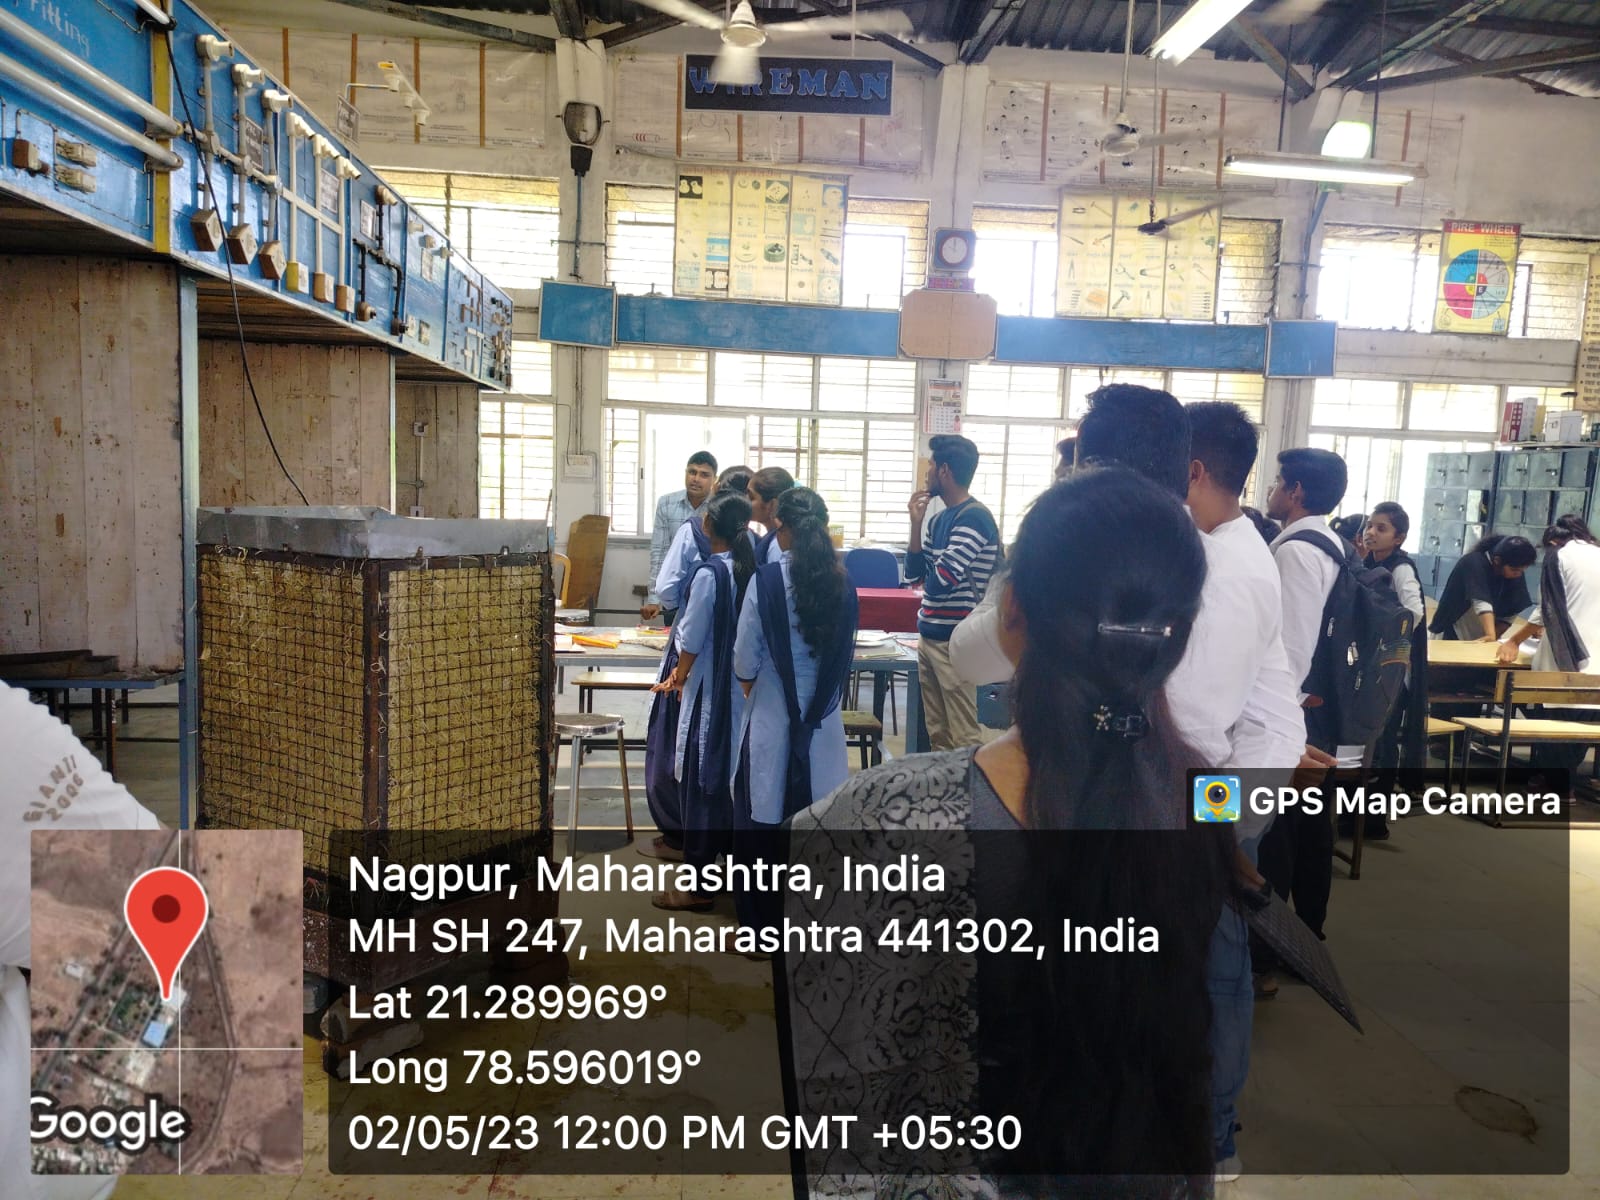 <p>VISIT AT ITI, KATOL on 2 May 2023</p>

<p>The Department of Physics along with the Department of Mathematics arranged VISIT for the students of second semester and fourth semester on 02th May 20223 from 11.00 am onwards. The place was Industrial Training Institute (ITI), Centre of Excellence (Fabricated Sector), Government of India, situated nearer to Katol. Some interested students took part in this visit. The aim of the visit is to relate the basic concepts of physics and mathematics used in industry related education.</p>

<p>&nbsp;</p>

<p>The different trades were seen in this visit. The students were visited in the Theory Building and Workshop. The theory of our subjects we taught in our class and how it is used in various trades was explained by us and FTT of various trades while visiting their workshop. Amongst them, electrical, fitter, welding and fabrication, motor mechanics etc. were seen by our students.</p>

<p>&nbsp;</p>

<p>This visit benefitted the students to understand the important role of practical&rsquo;s, soft-skills, the career-oriented approach, and many ways. This visit was knowledgeable due to the interactive role of the faculties of Government ITI, the respected principal madam, and interactive students of ITI.</p>

<p>The following outcomes where I found in this visit:</p>

<p>&nbsp;</p>

<p>&nbsp;</p>

<p>&nbsp;</p>

<p><strong>Outcomes:</strong></p>

<ol>
	<li>This visit promoted their self-employment ability.</li>
	<li>Students generate awareness about the importance of project work in entrepreneurial development.</li>
</ol>

<p>The students understand how basic knowledge along with practical experiments makes our skill enriched.</p>
